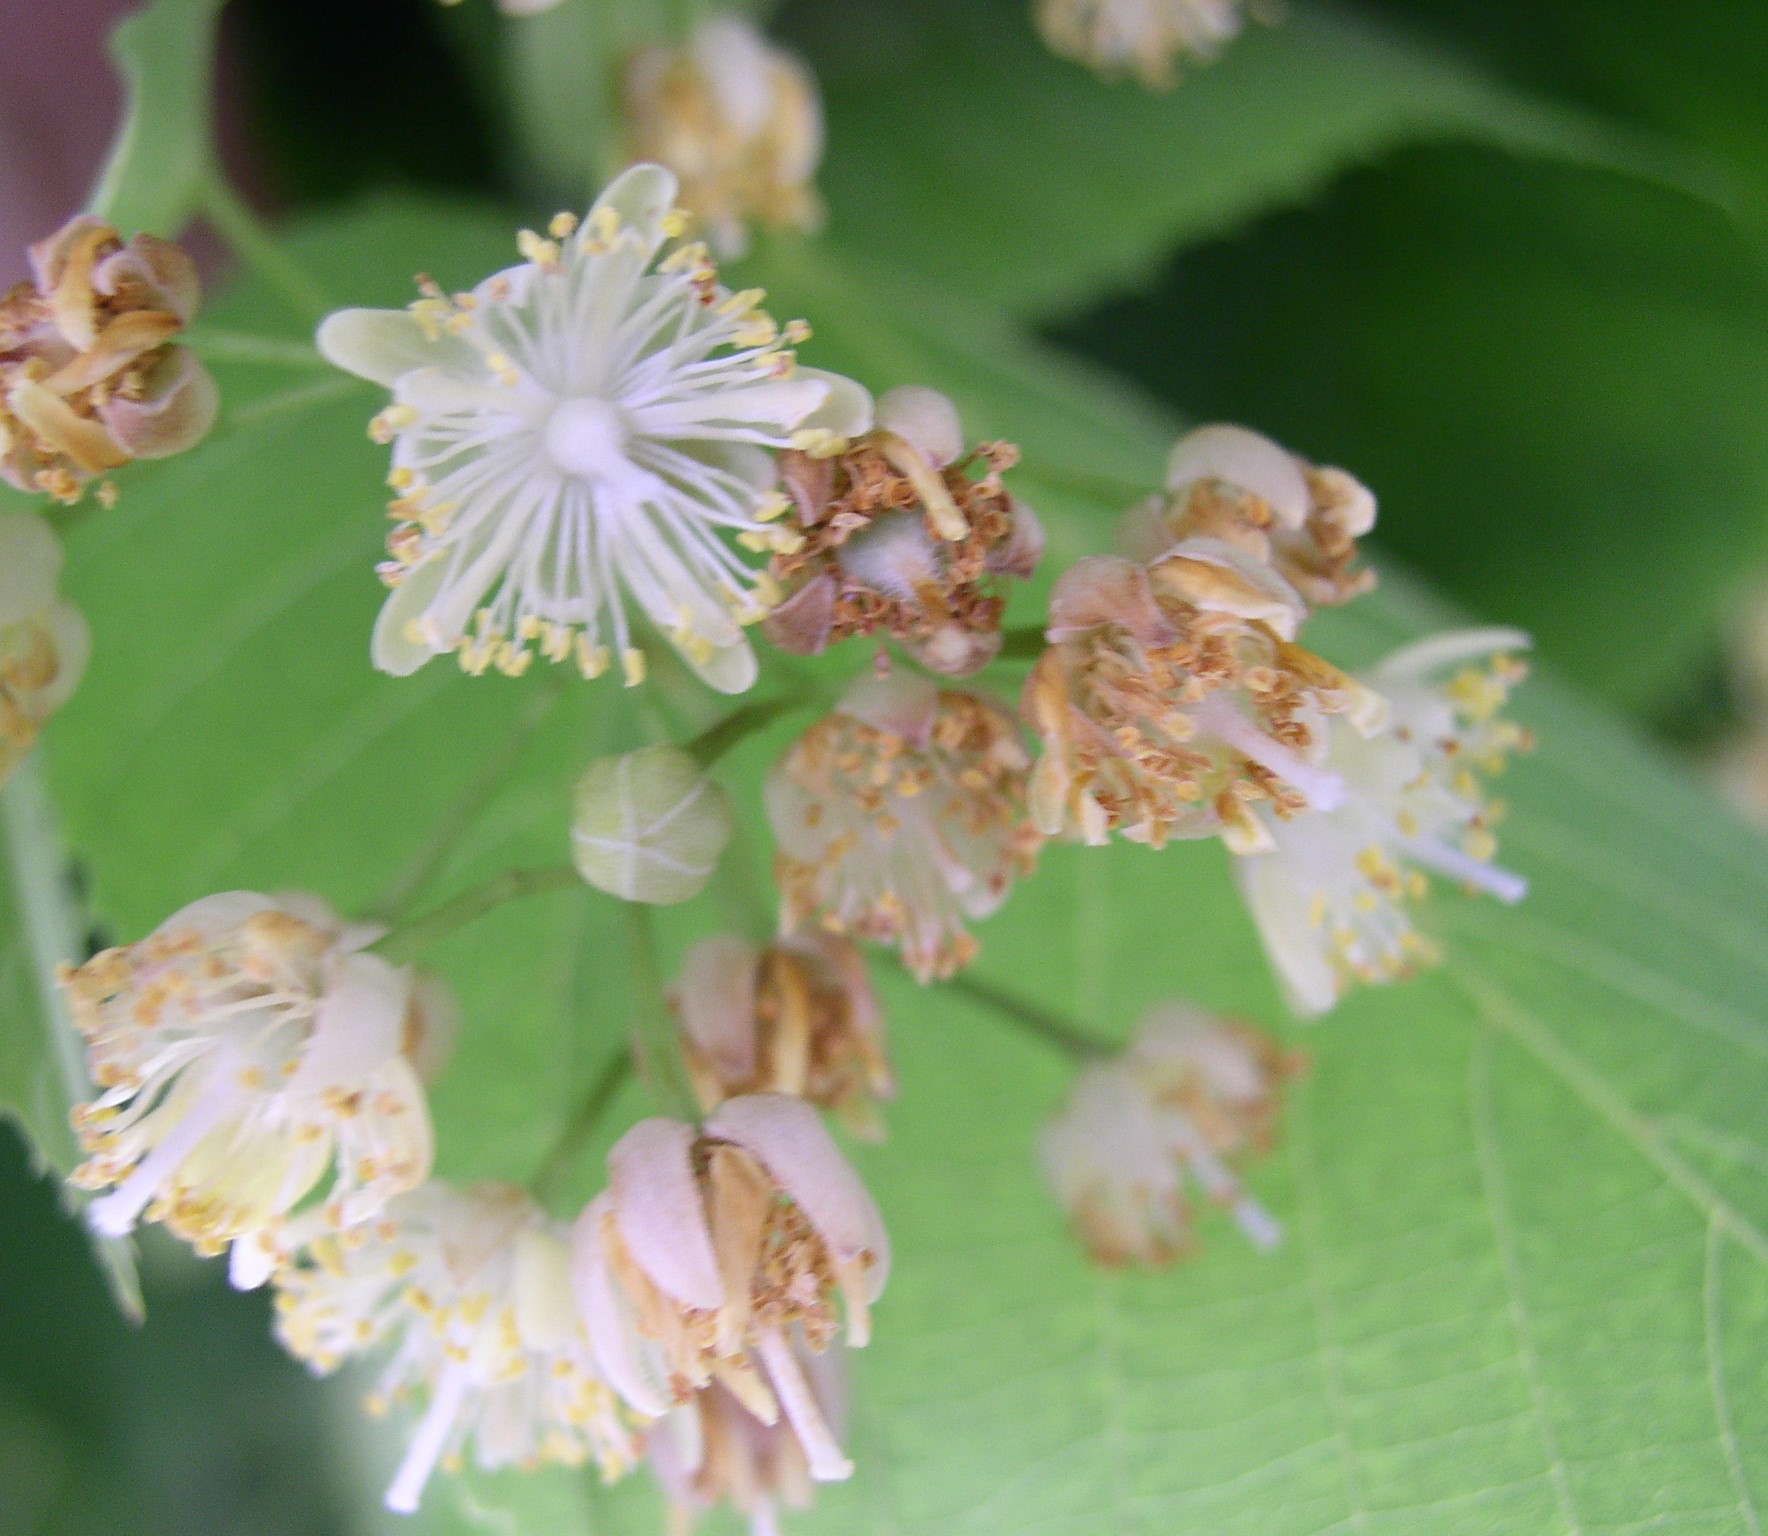 Honeybees harvest nectar from American linden flowers, giving the resulting honey a slightly minty flavor. (NDSU photo)